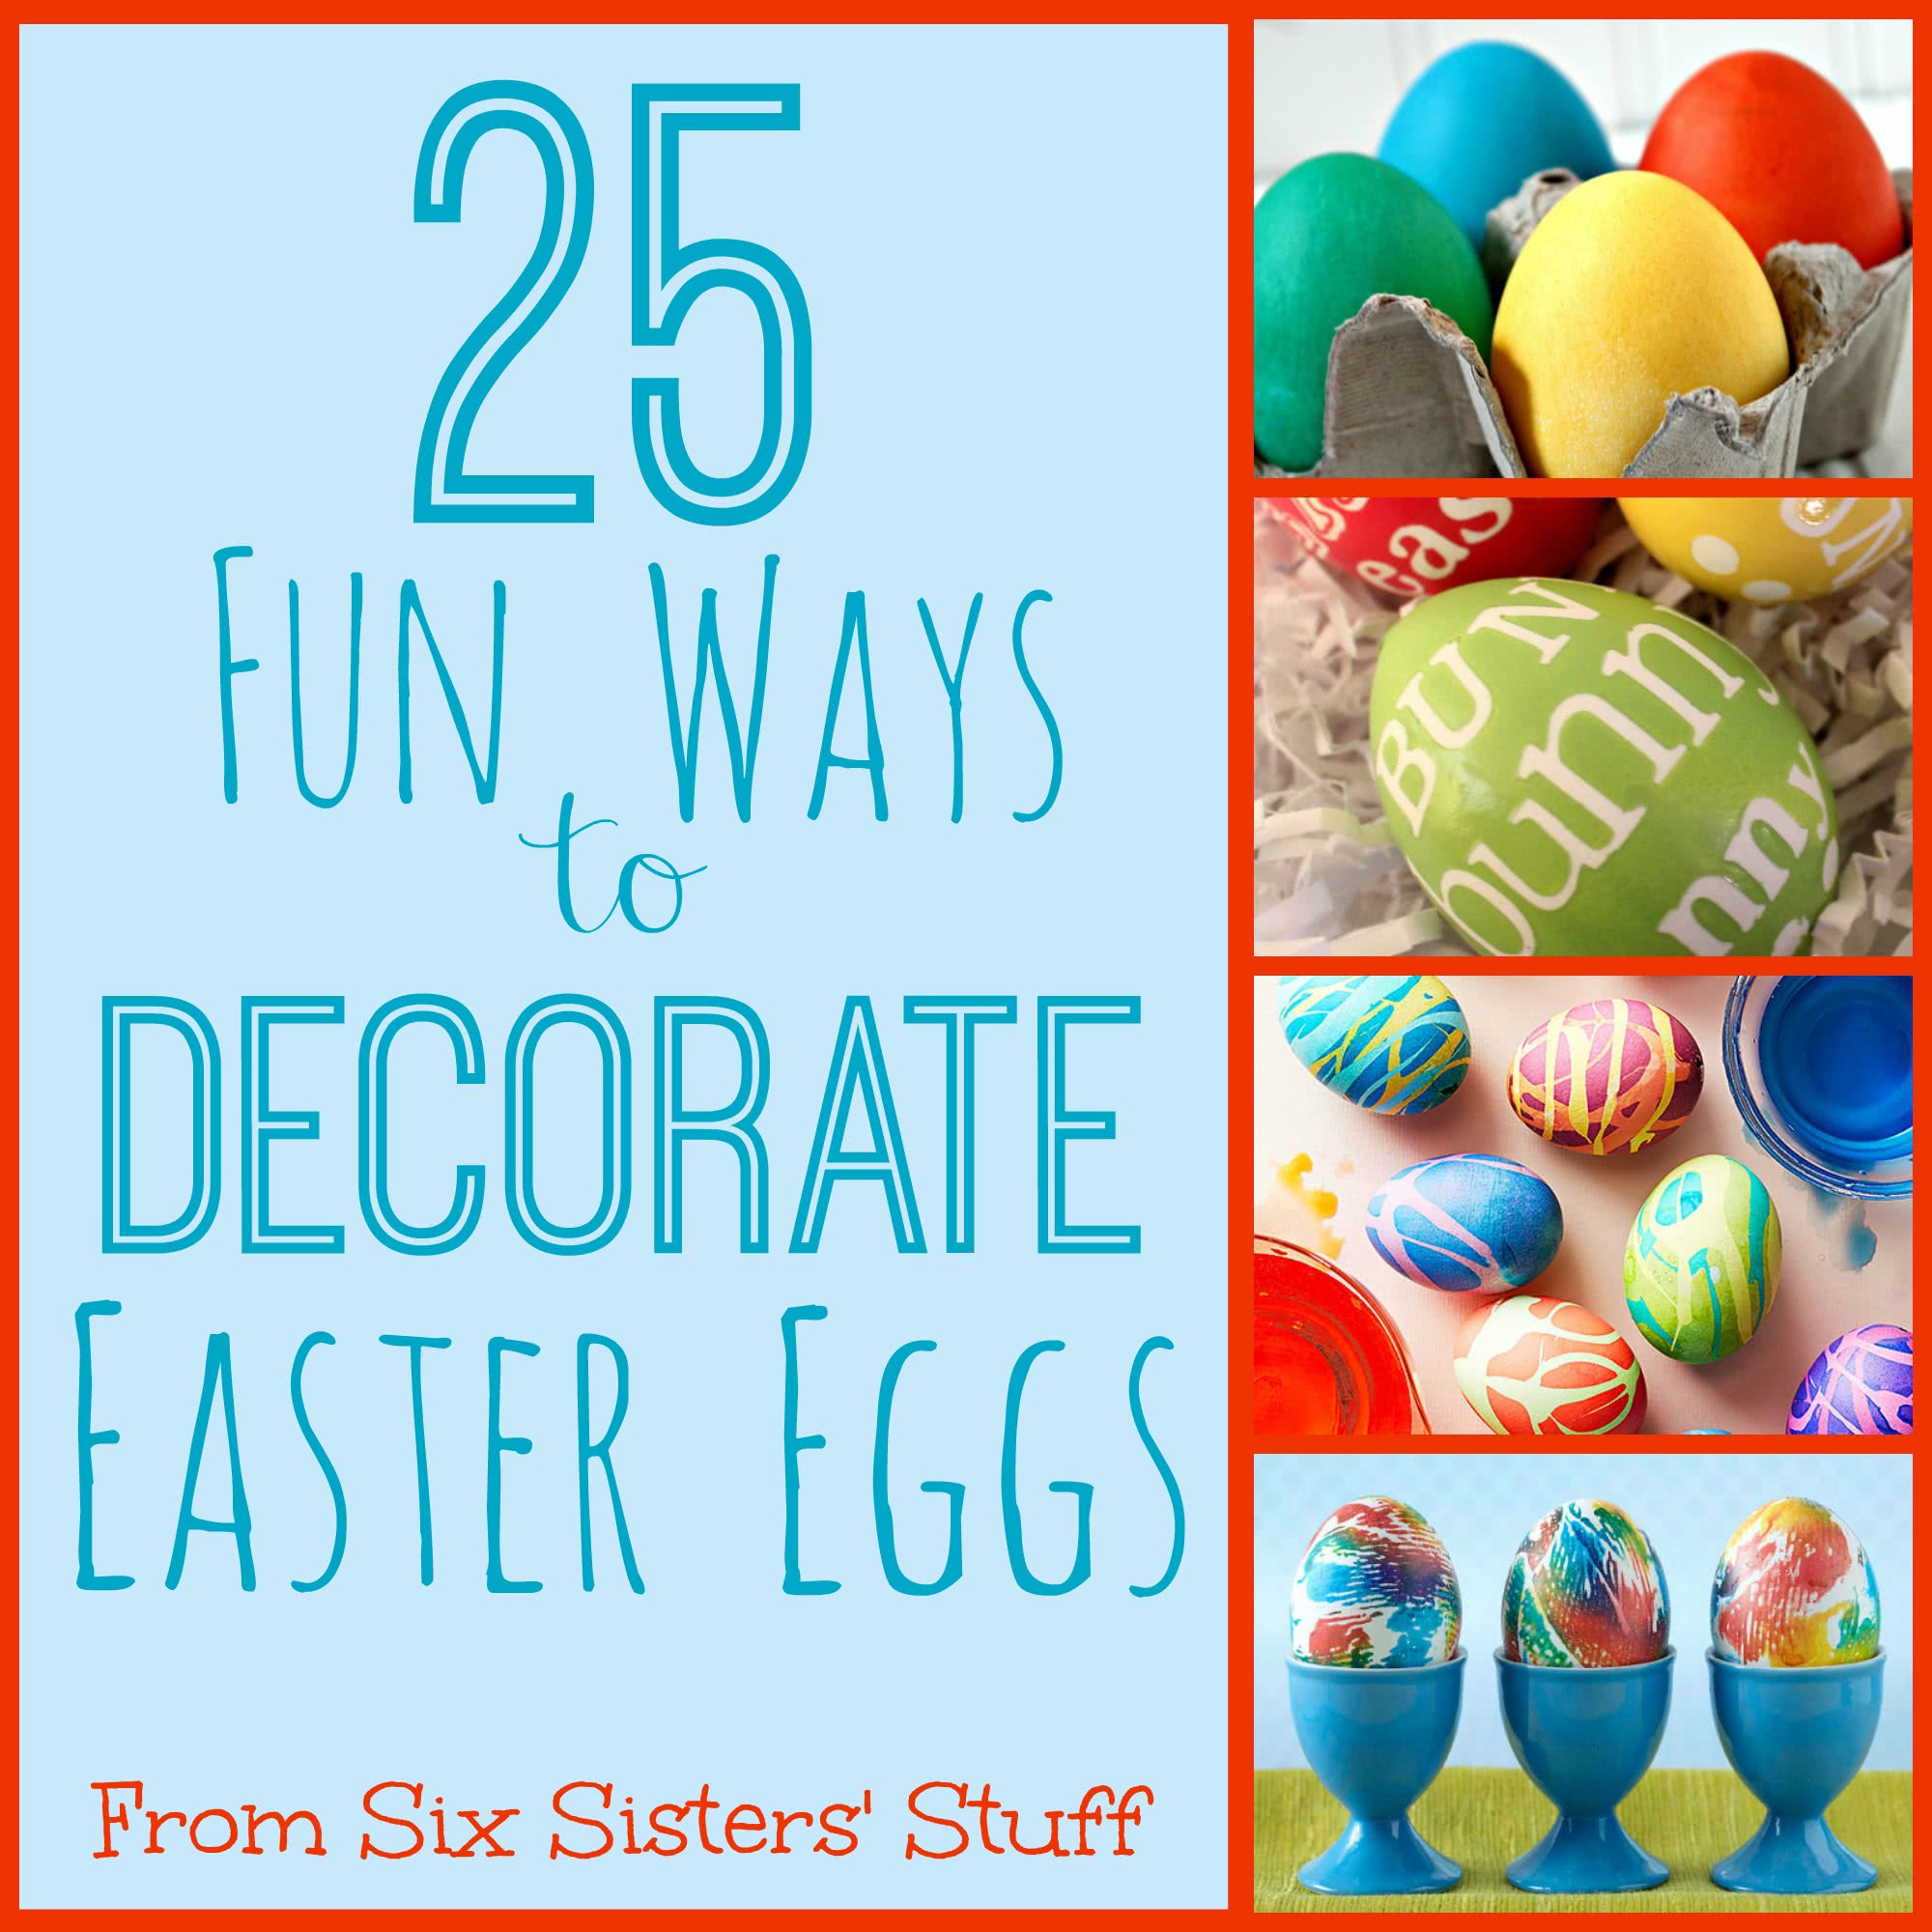 25 Fun Ways to Decorate Easter Eggs